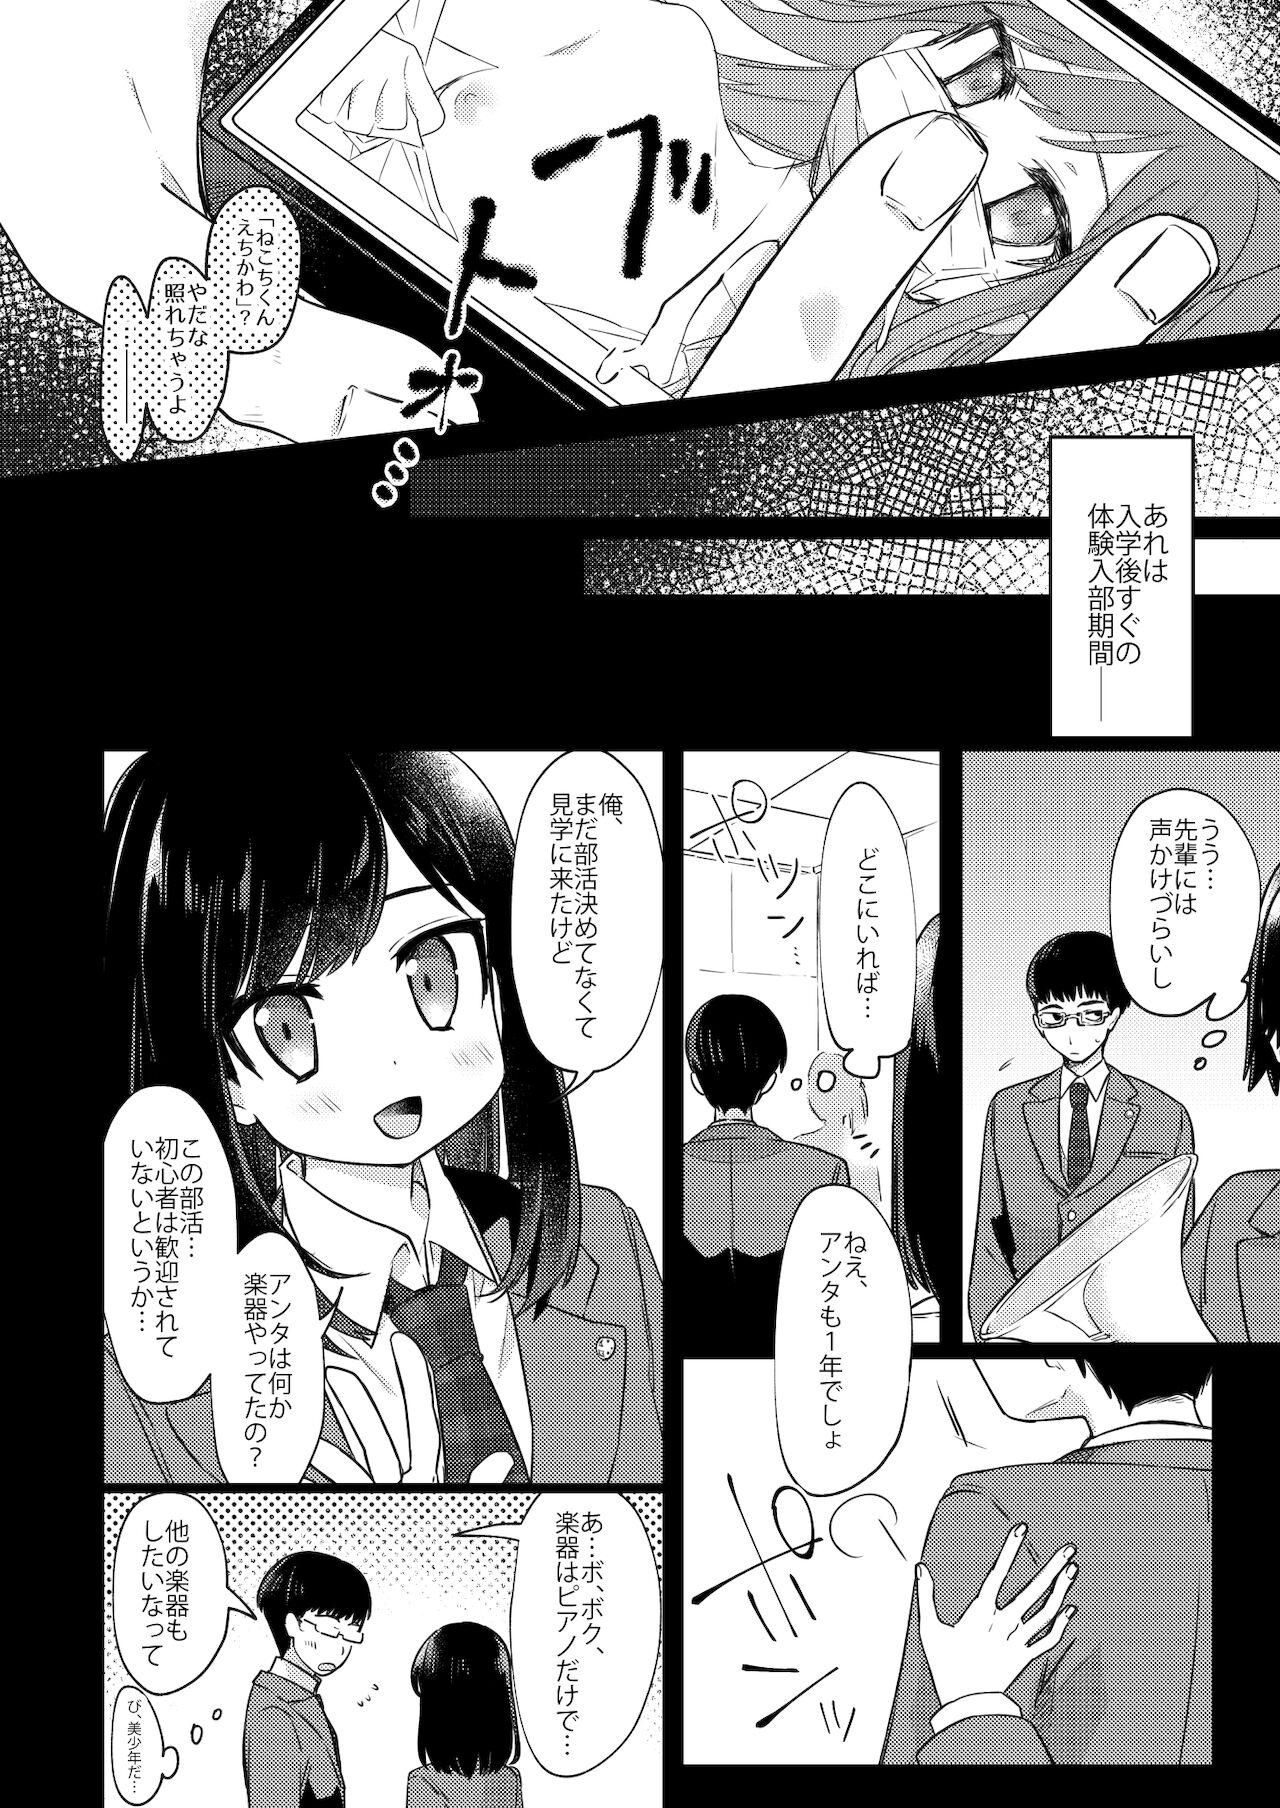 Rabo 女装少年ねこちにガチ恋× - Original Officesex - Page 3